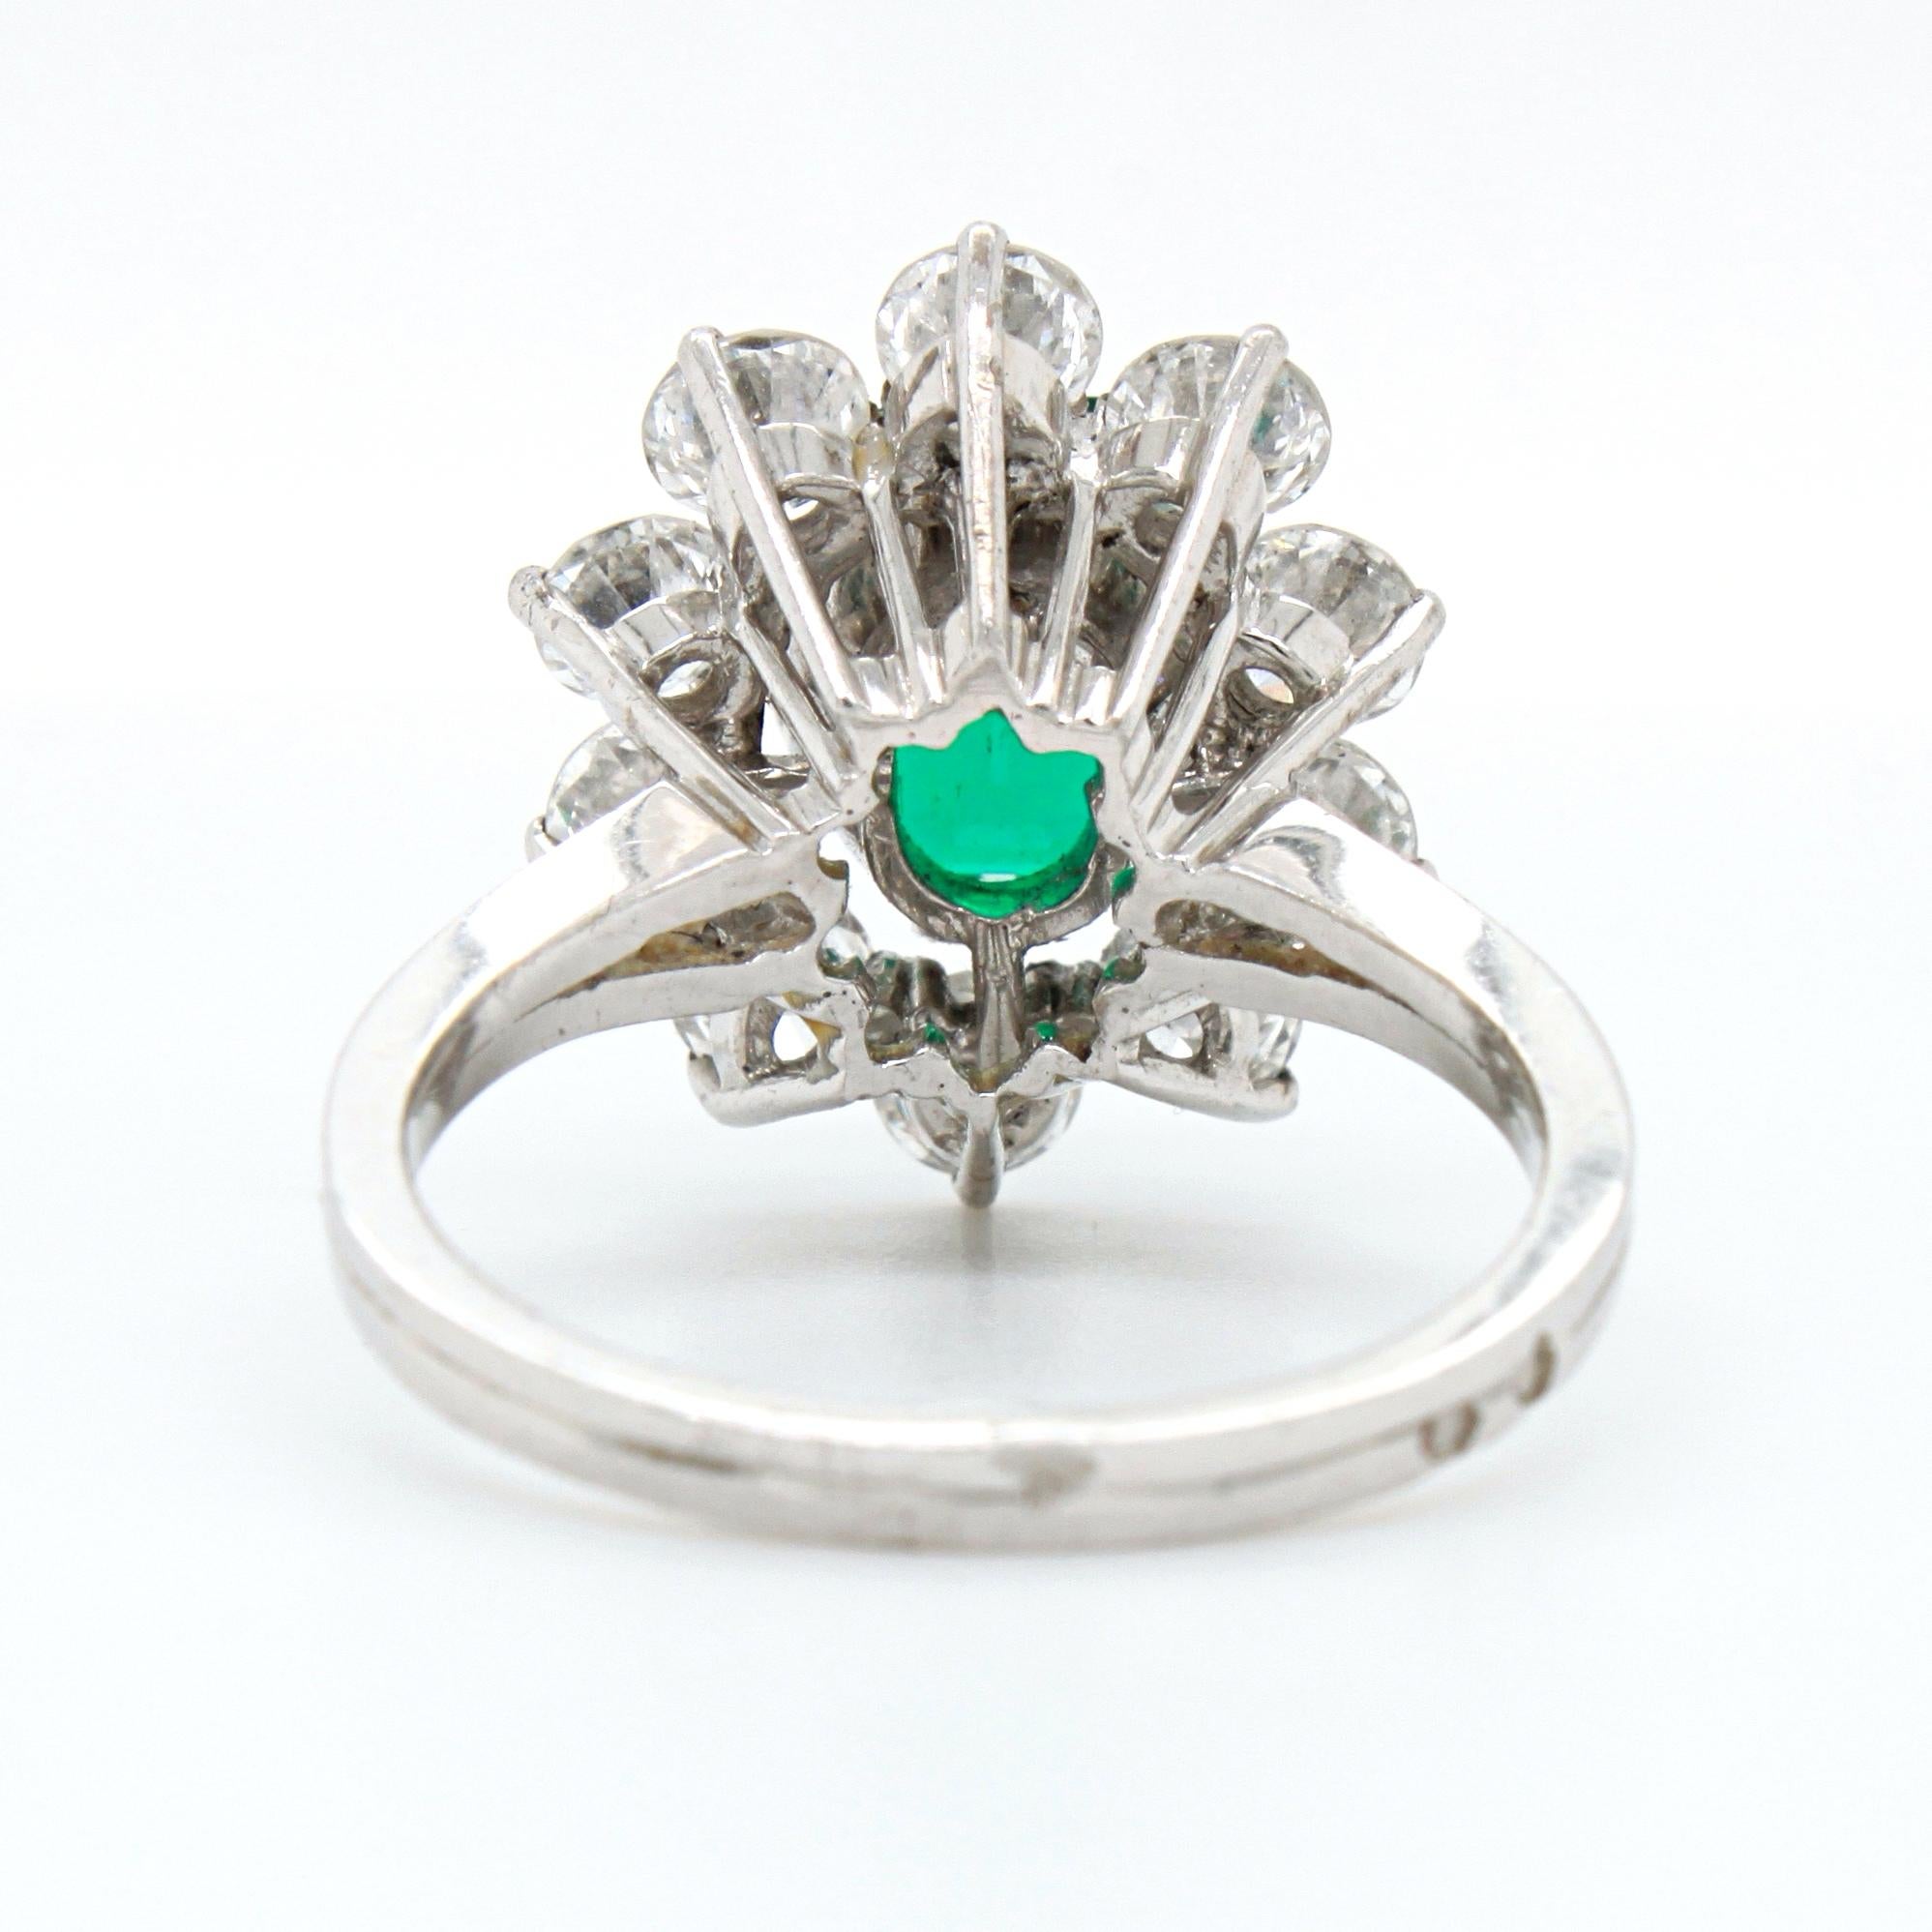 Columbian Emerald 'Minor-Oil', 1.88ct, and Diamond Ring, France For Sale 4